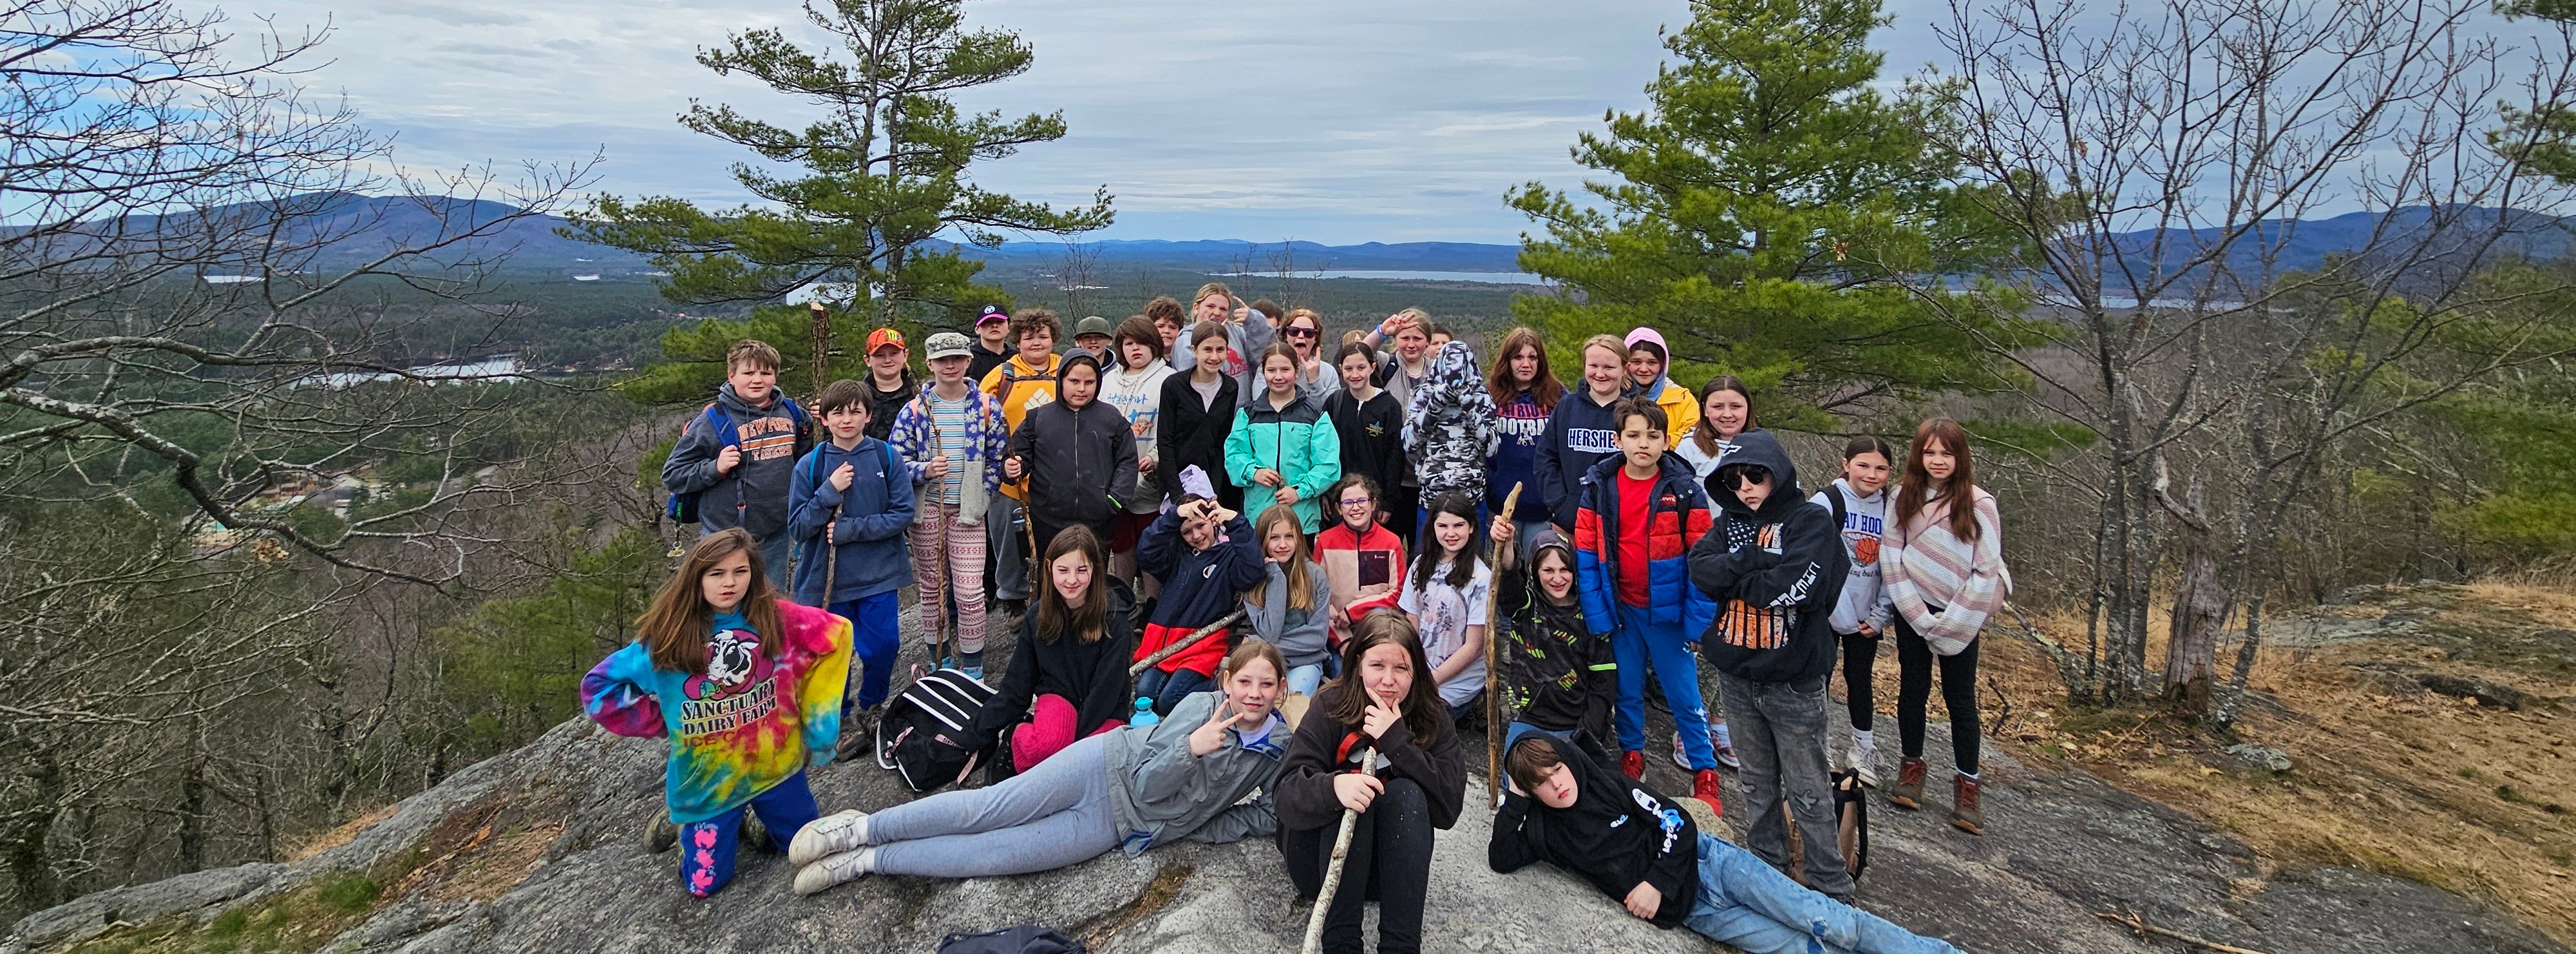 group of students gathered on a large rock